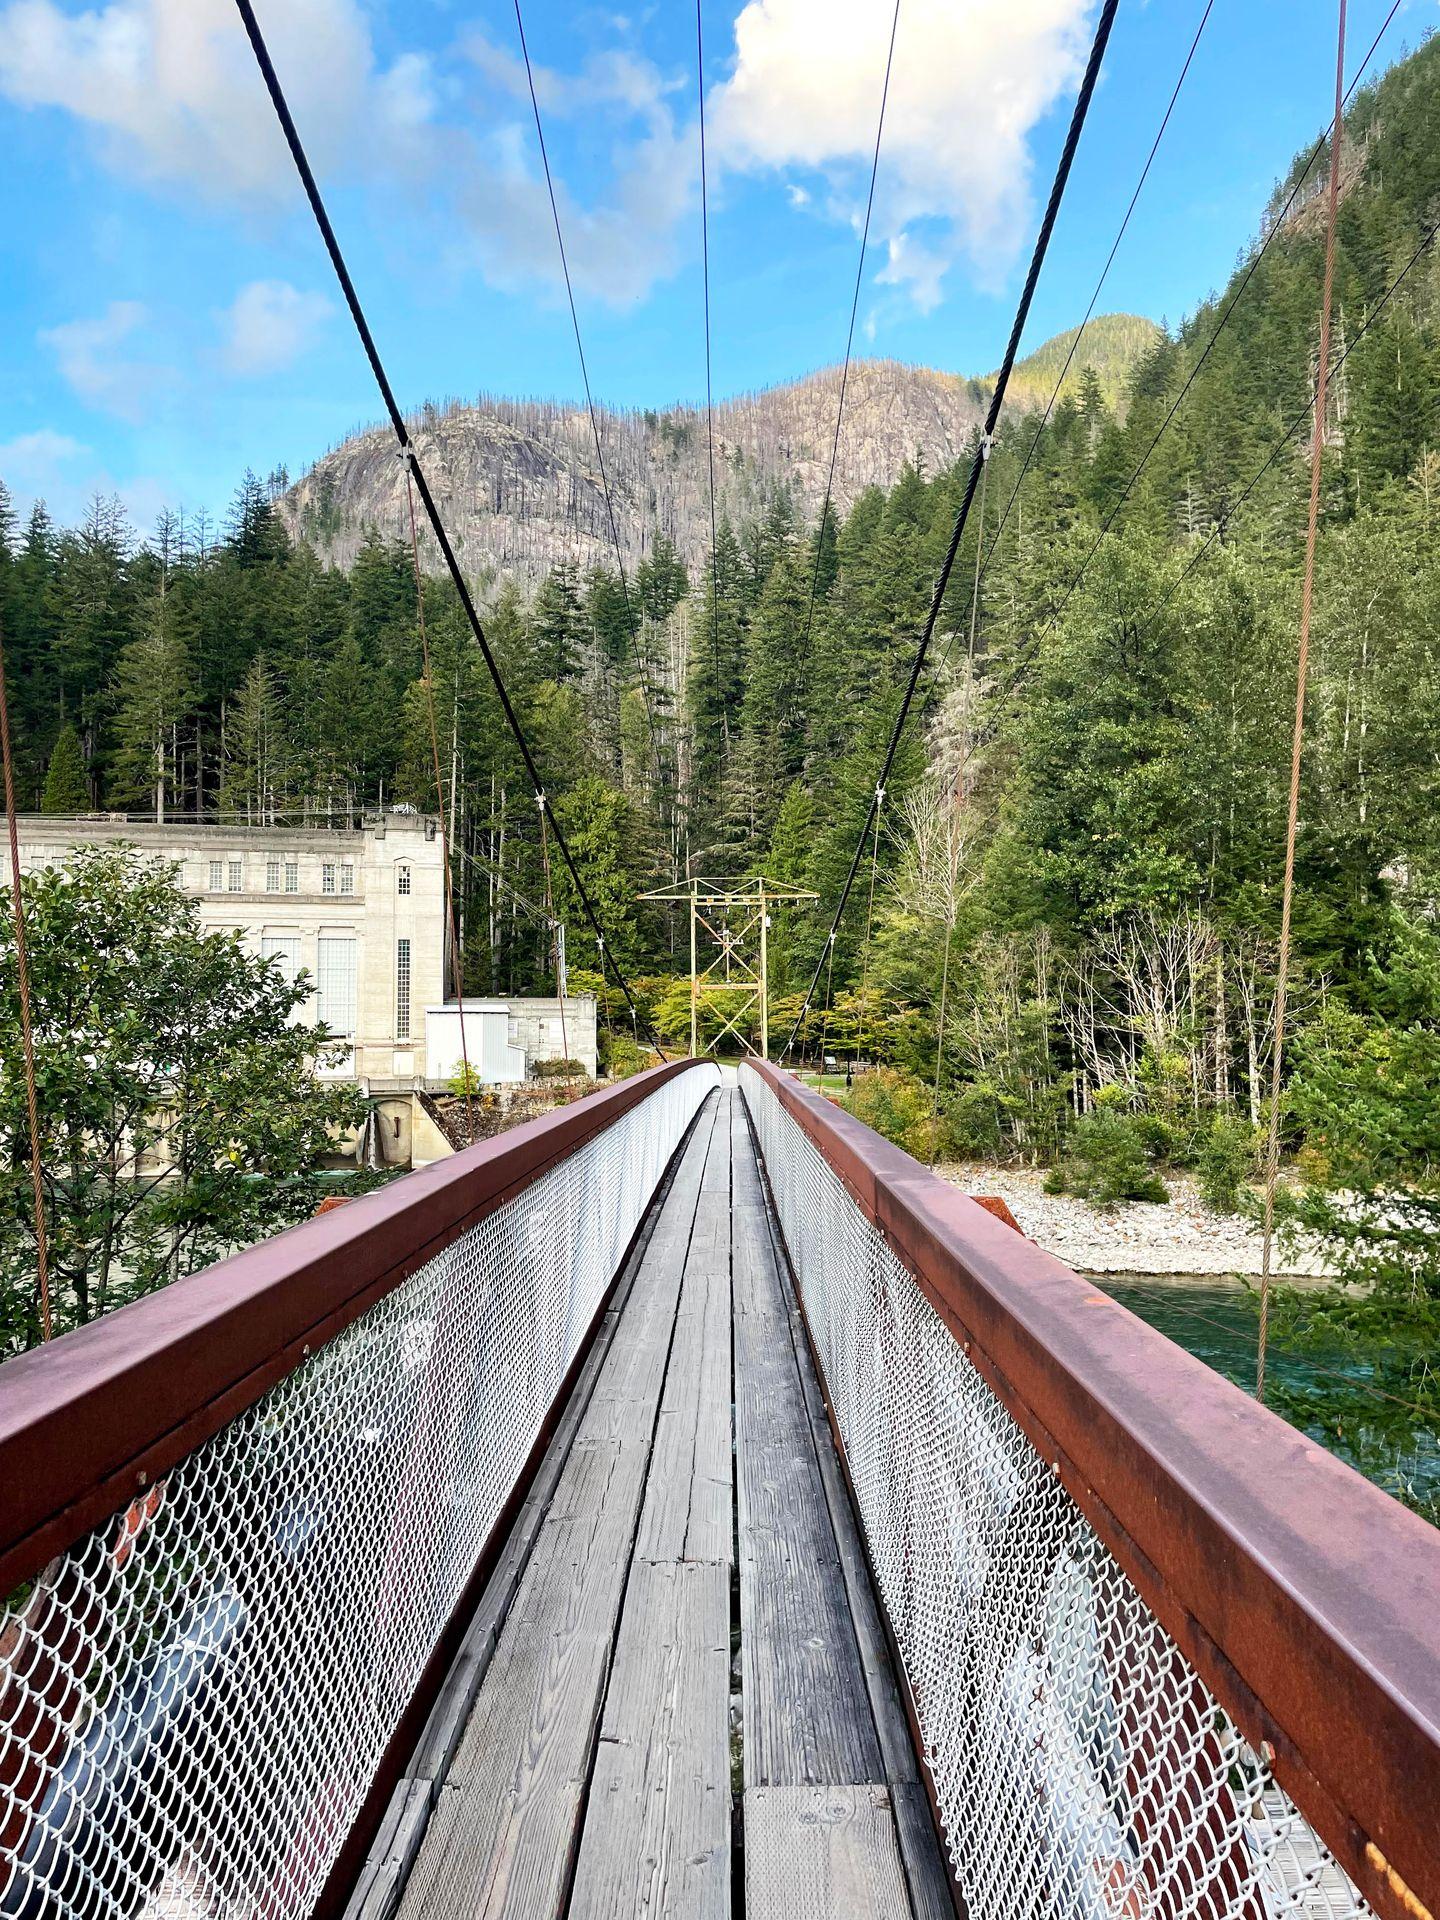 Looking across the Suspension Bridge in Newhalem. Across the bridge there are trees and mountains.